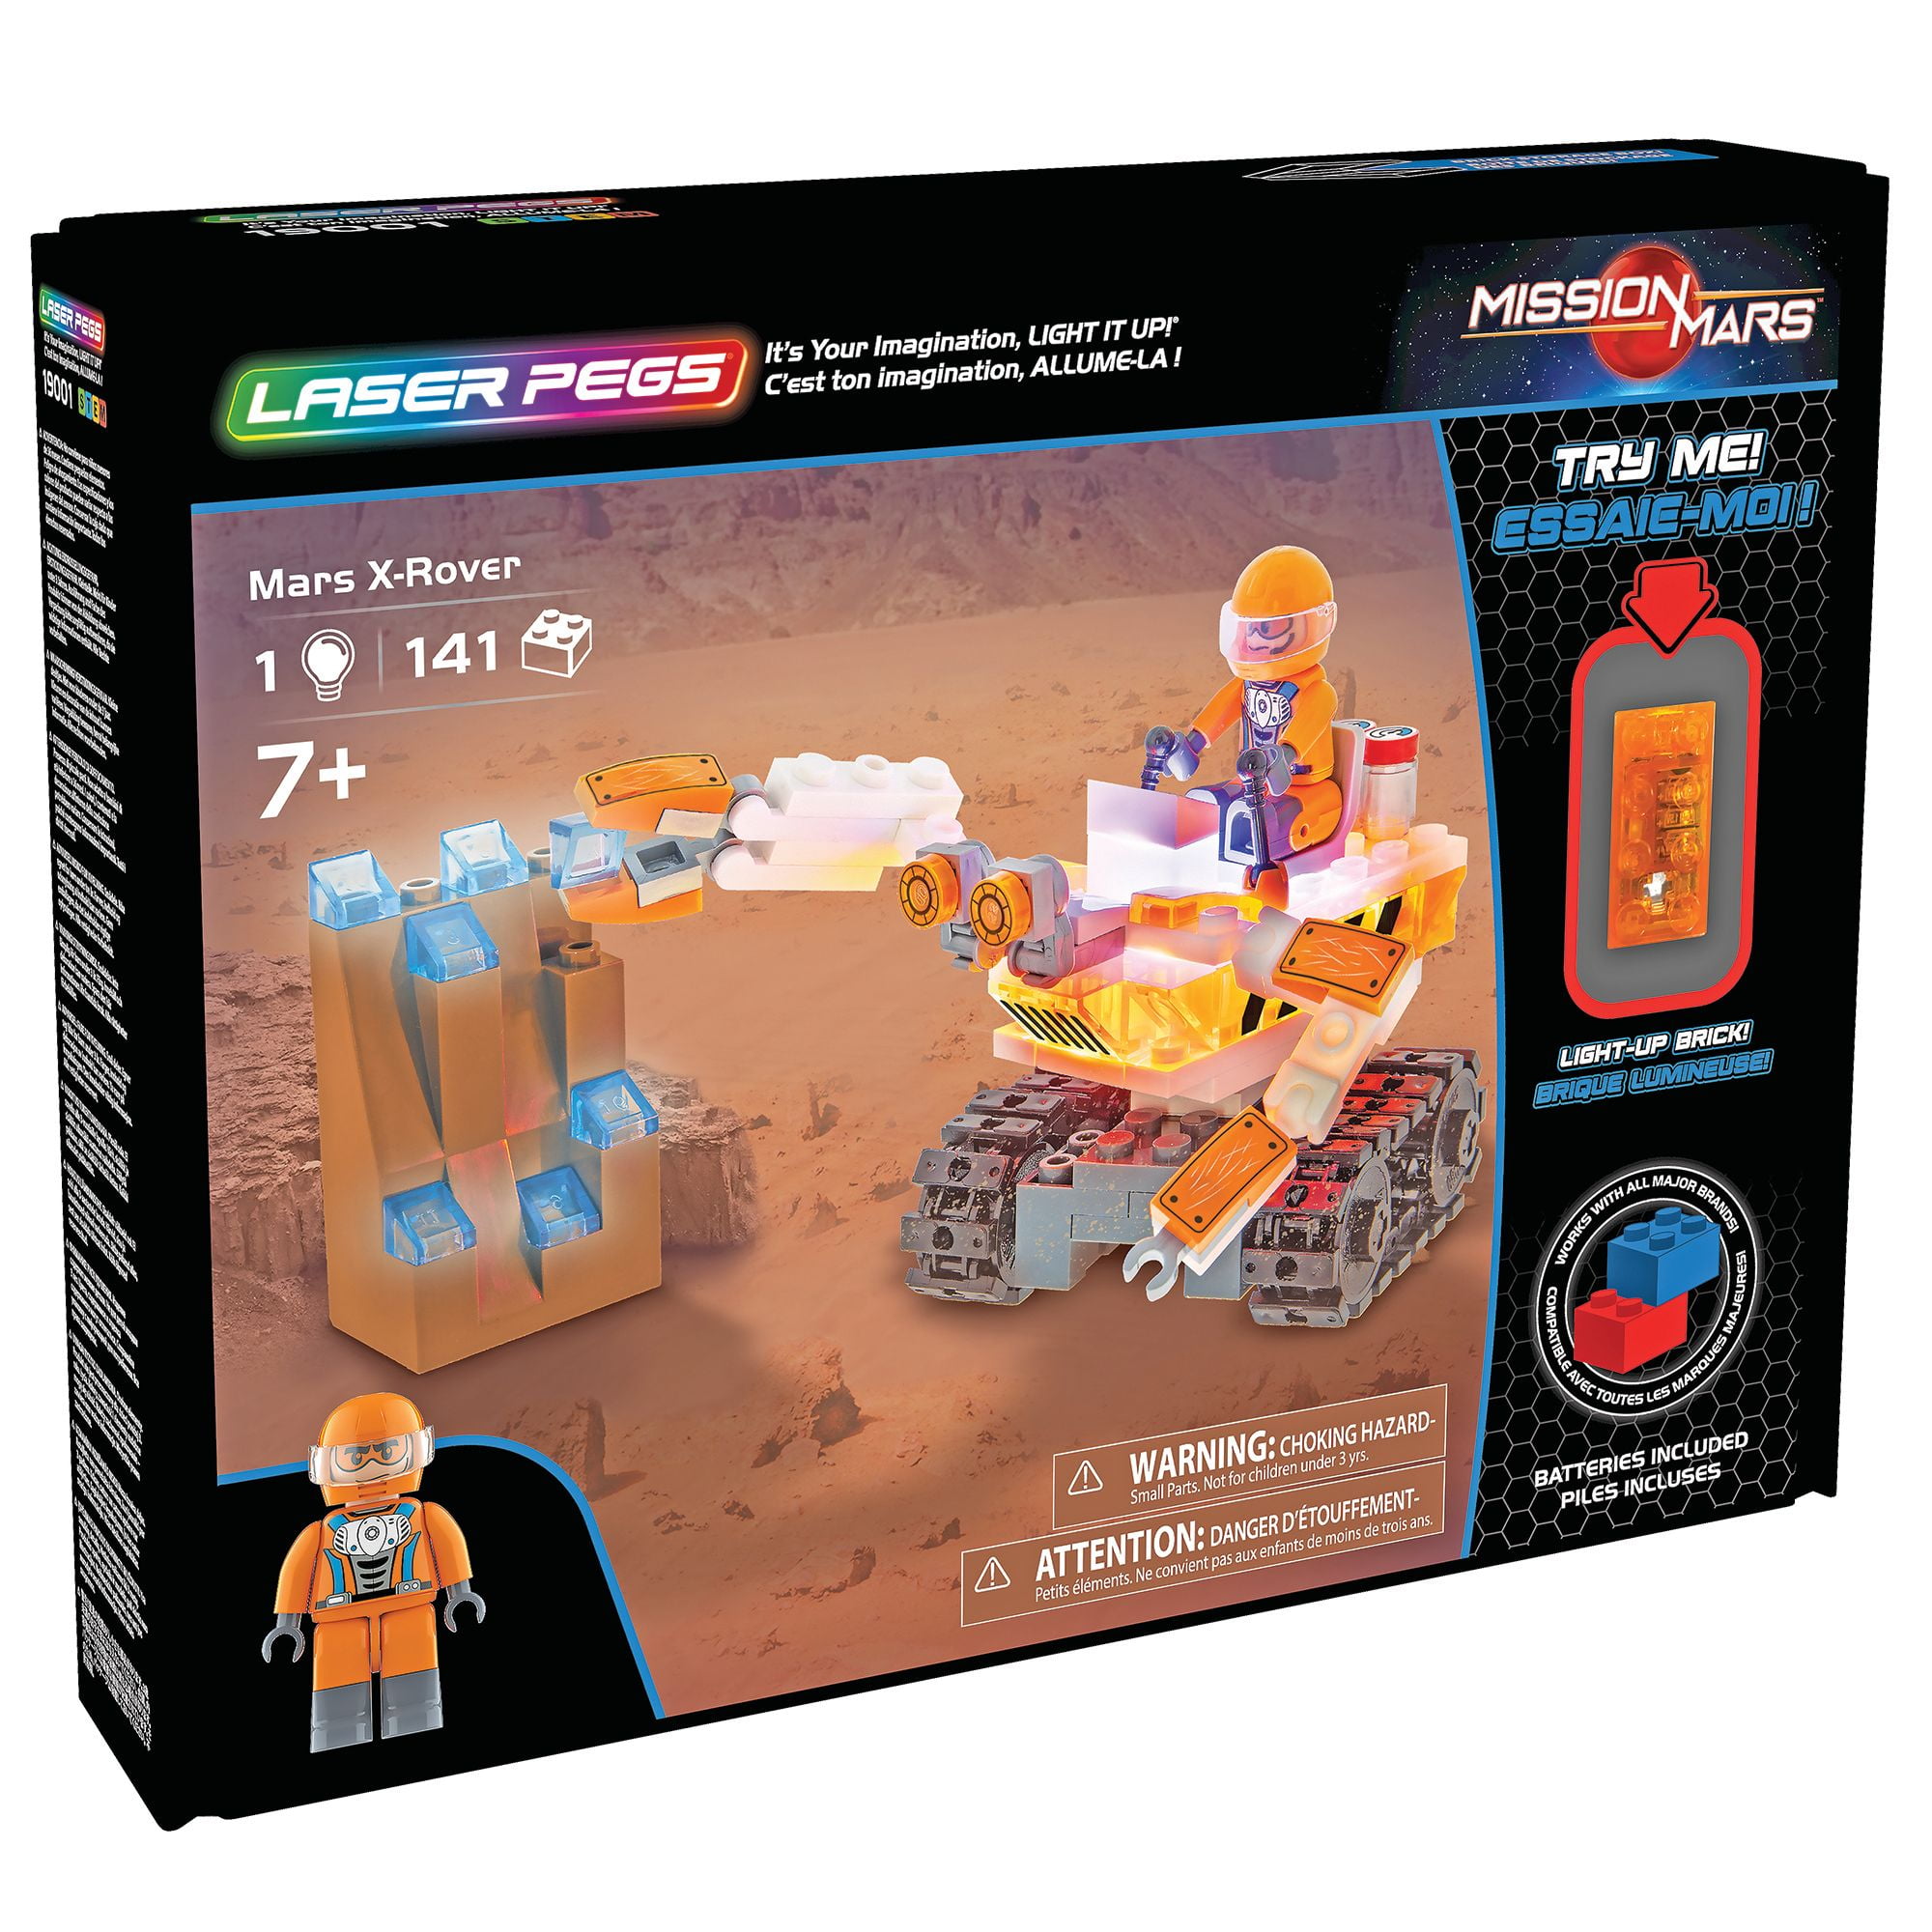 Laser Pegs Mars X-rover 141 PC W/led for sale online